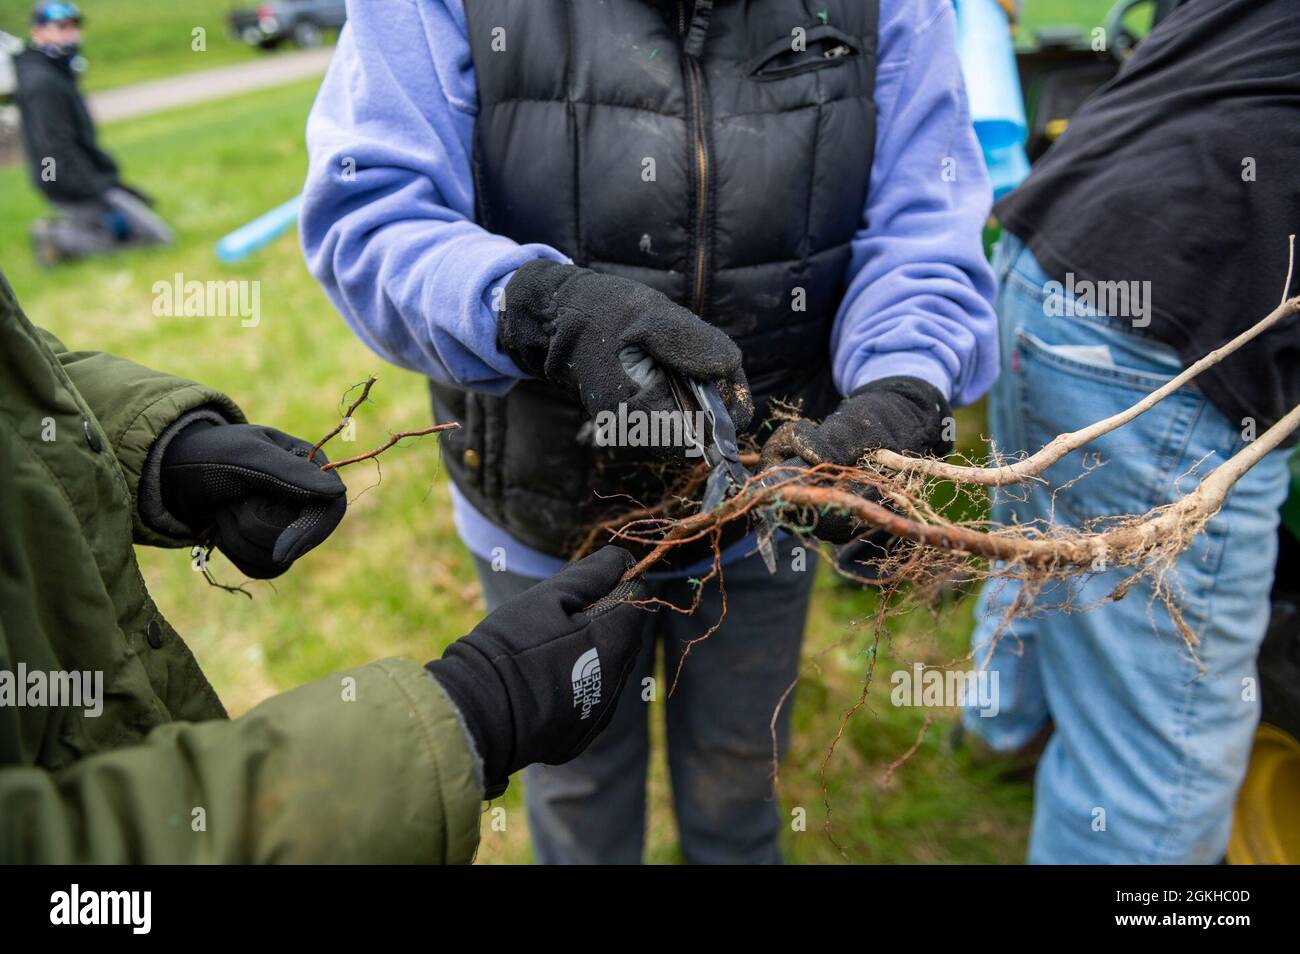 A park ranger and volunteers trim the roots of a tree sapling during an Earth Day 2021 event at Crooked Creek Lake in Ford City, Pennsylvania, April 22, 2021. Approximately 20 volunteers attended the event to plant 200 tree saplings, which included Eastern White Pine and Swamp White Oak, donated by West Penn Power. Crooked Creek is one of 16 flood control reservoirs within the Pittsburgh District of the U.S. Army Corps of Engineers. Several reservoirs and parks throughout the Pittsburgh district celebrated Earth Day by hosting either a volunteer cleanup or tree-planting day. Stock Photo